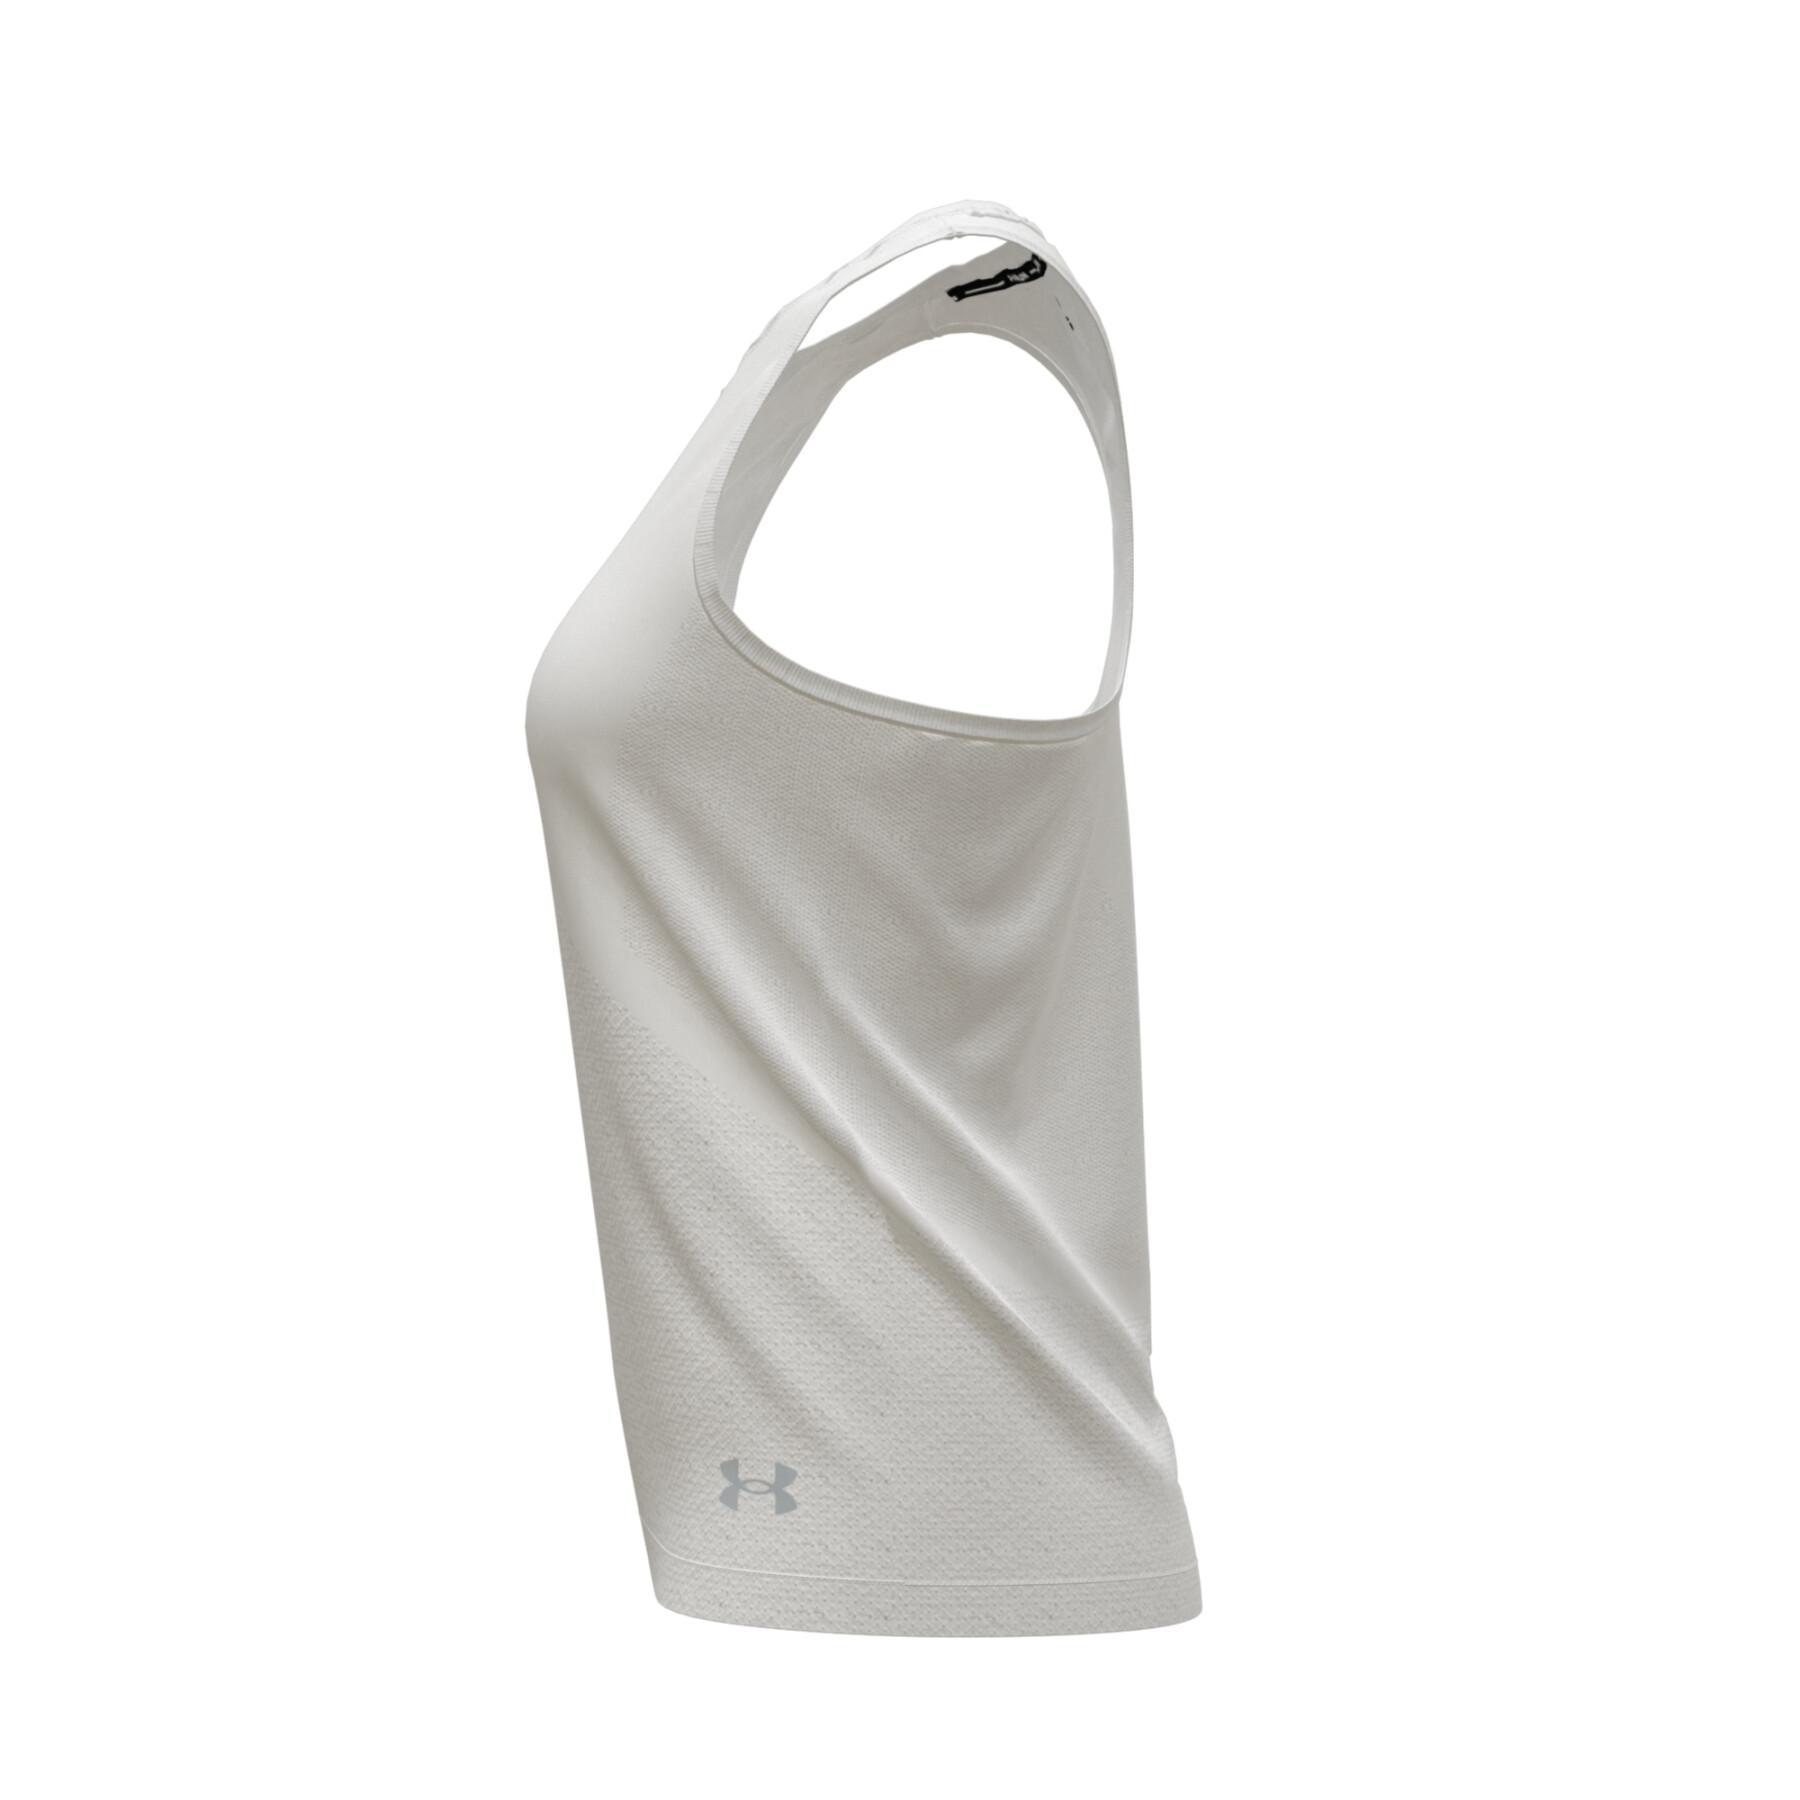 Seamless tank top for women Under Armour Stride